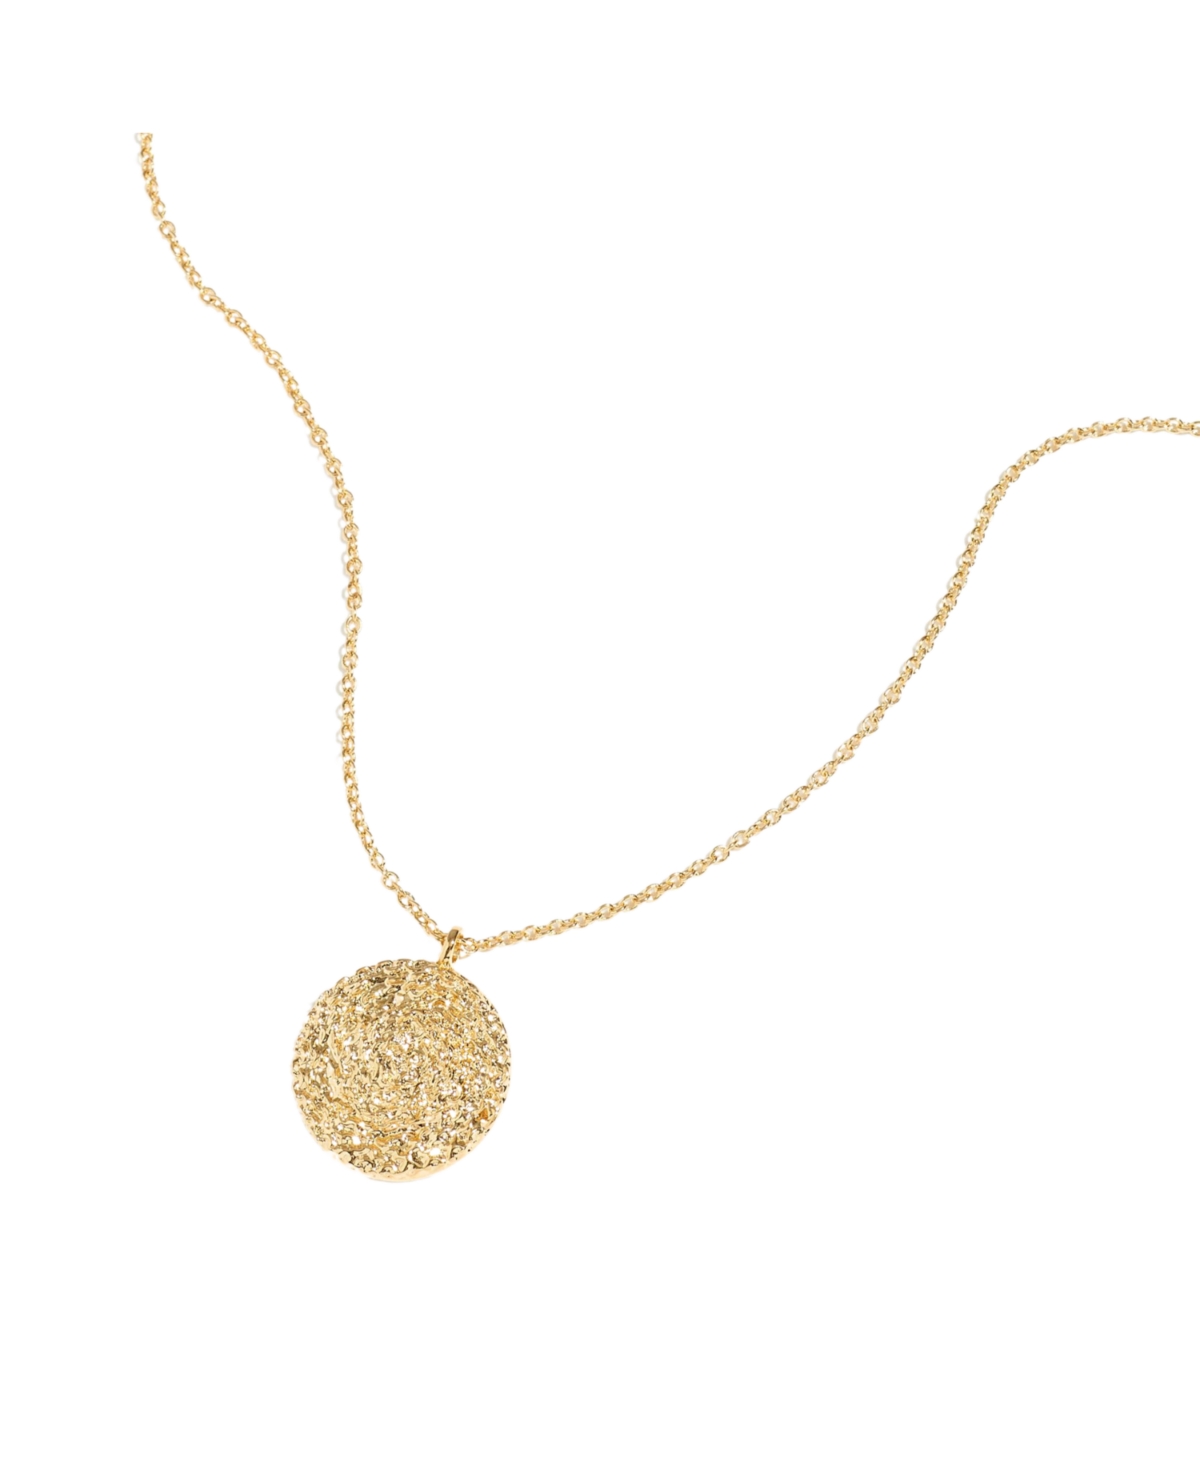 Chain Reaction Necklace - Gold